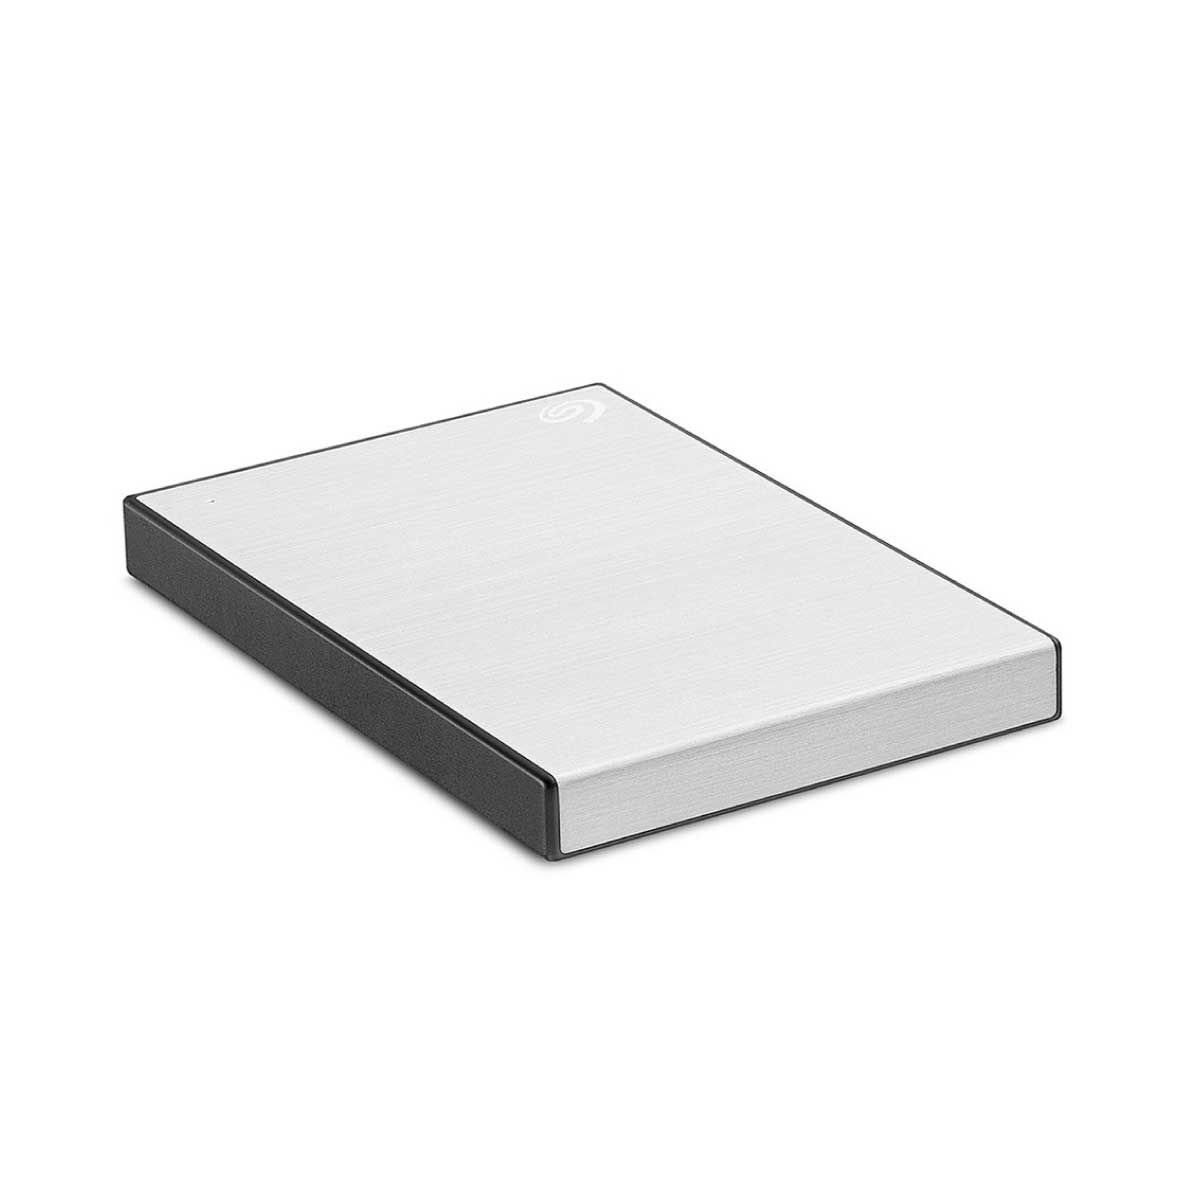 1 TB PORTABLE HDD (ฮาร์ดดิสก์พกพา) SEAGATE ONE TOUCH WITH PASSWORD (SILVER) (STKY1000401)